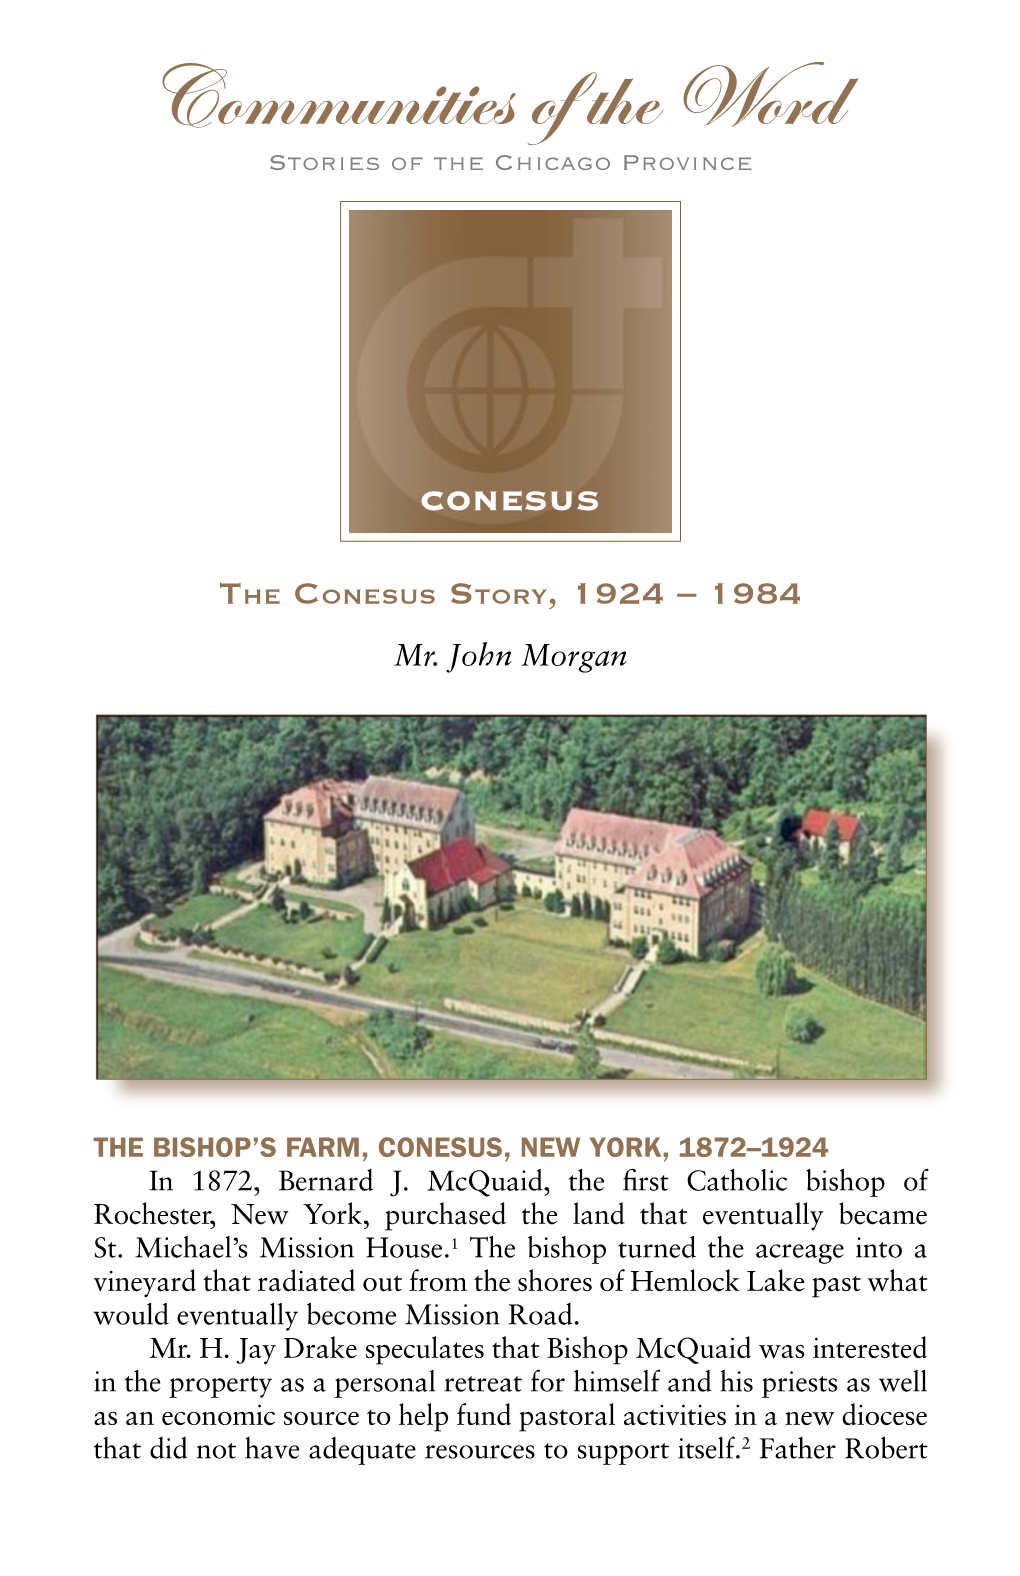 The Conesus Story, 1924 – 1984 Mr